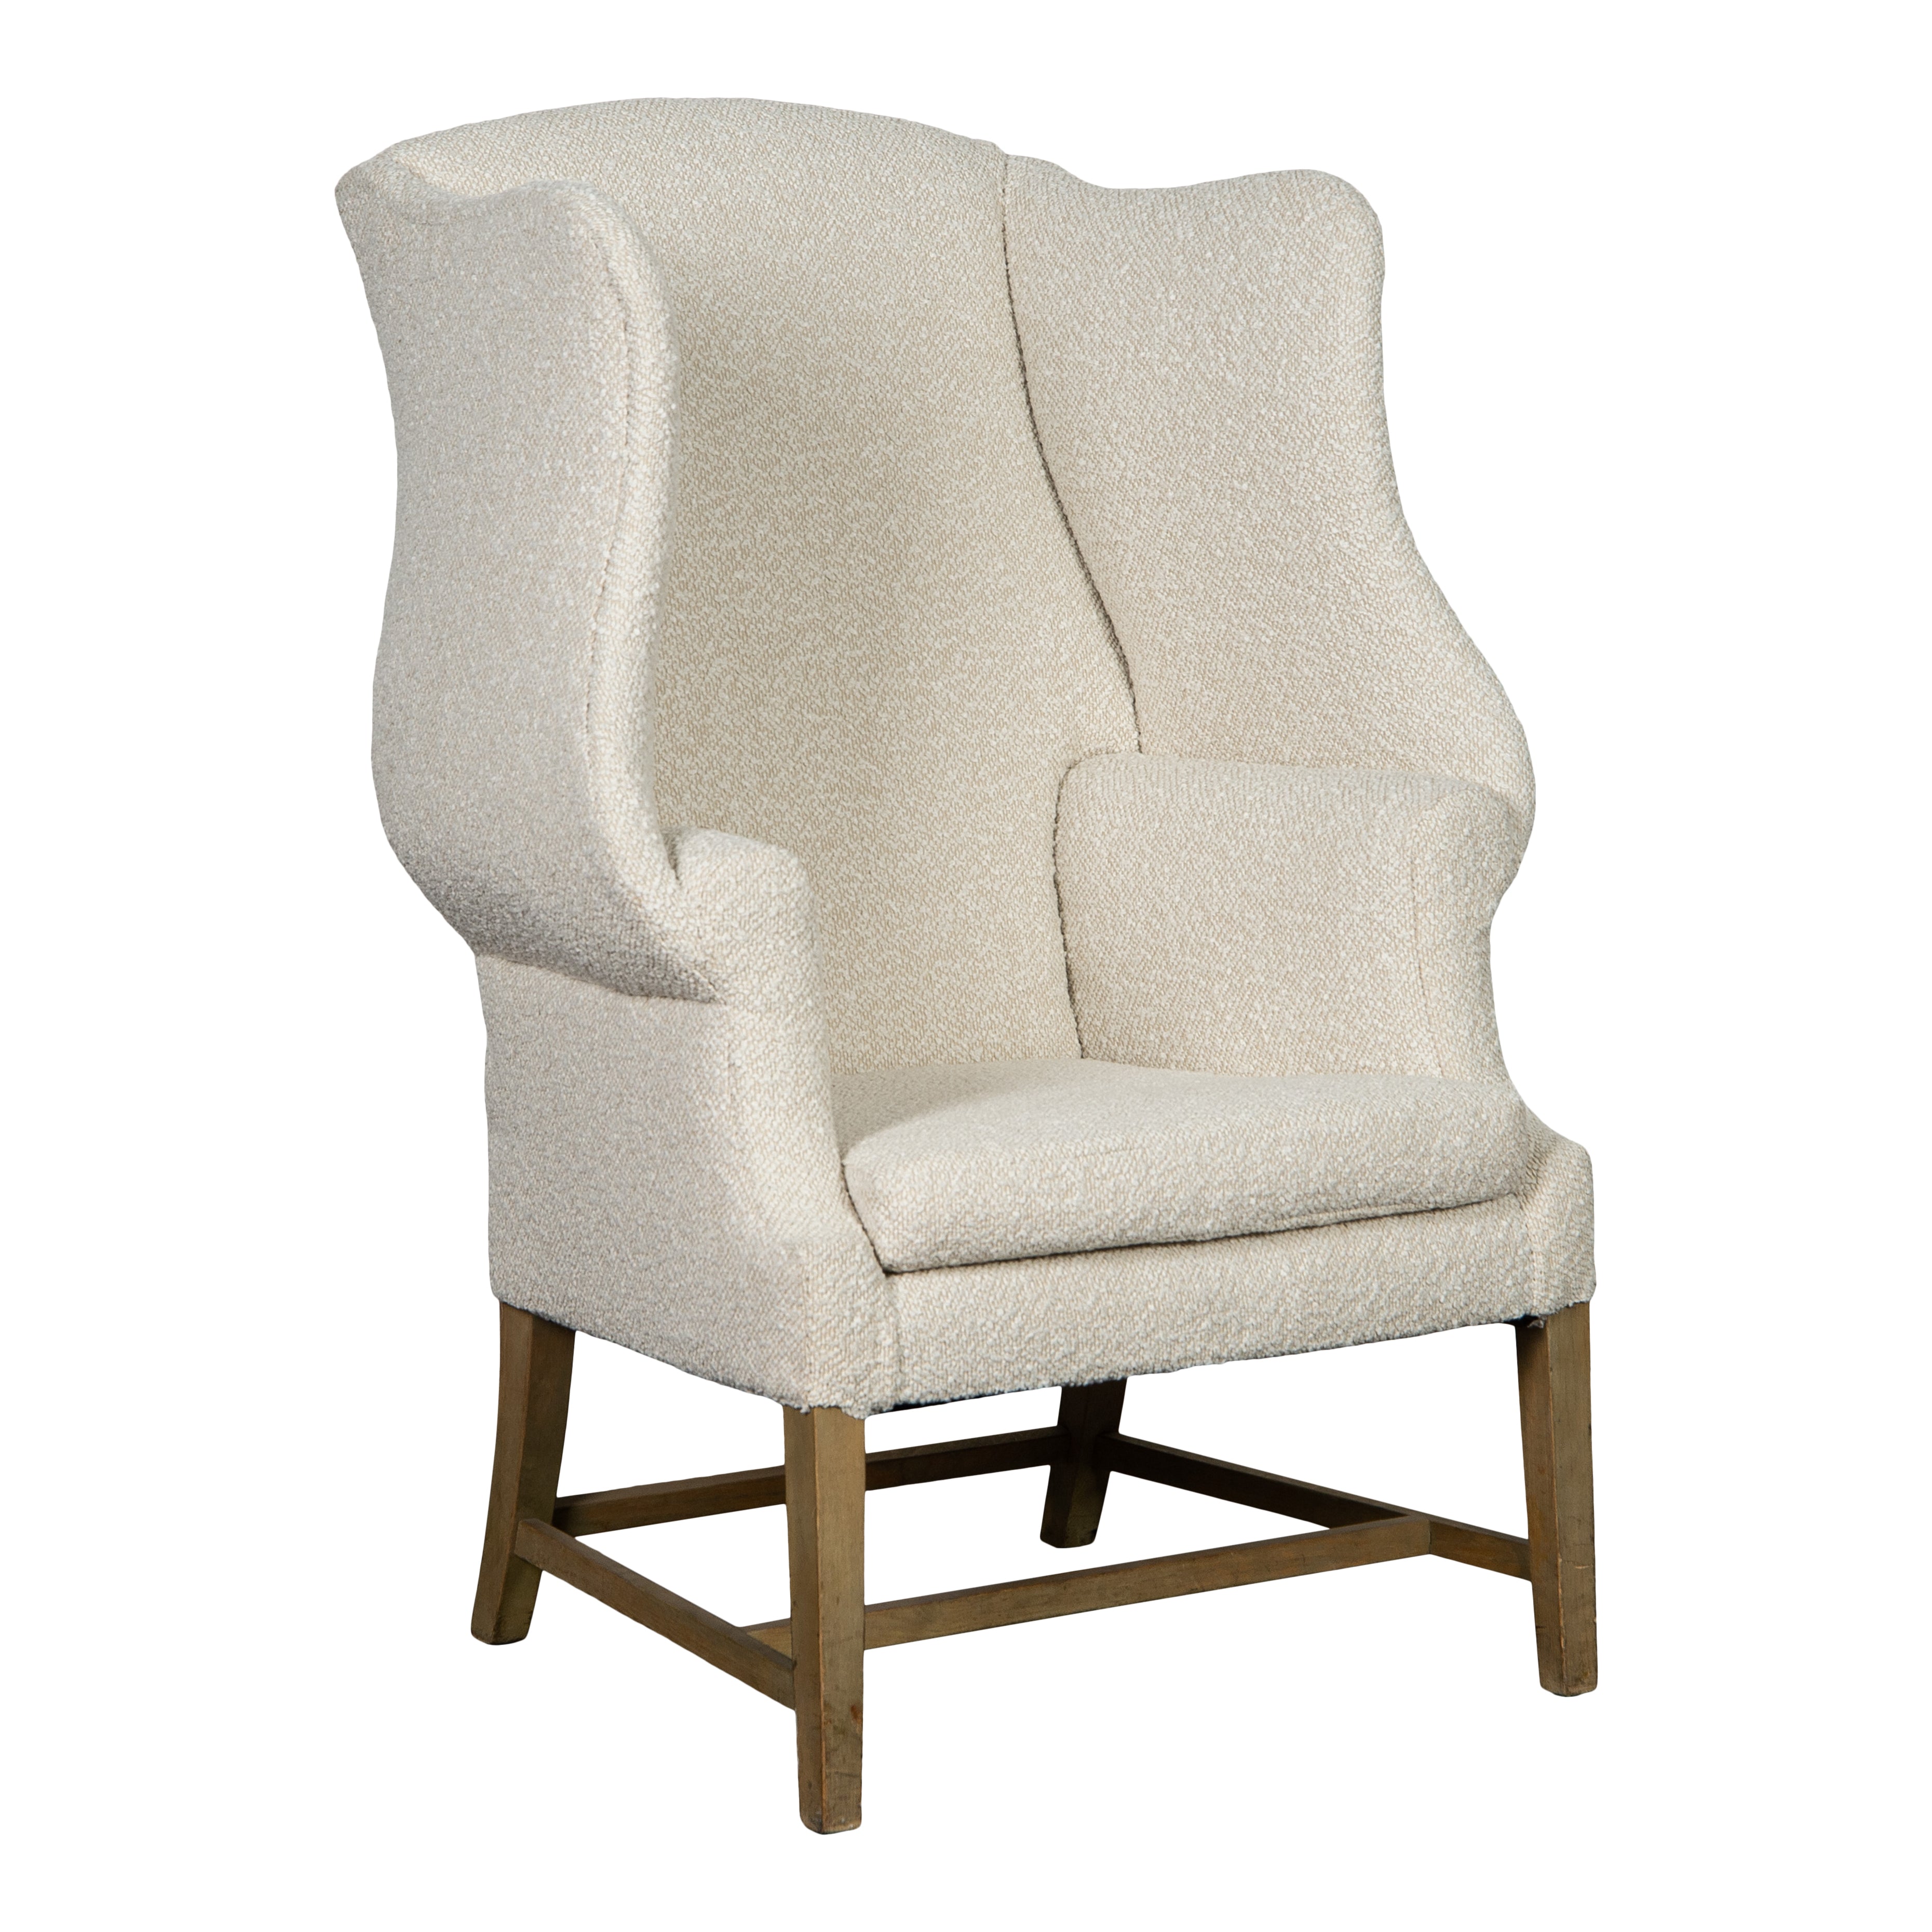 Tiffy Wingback Chair